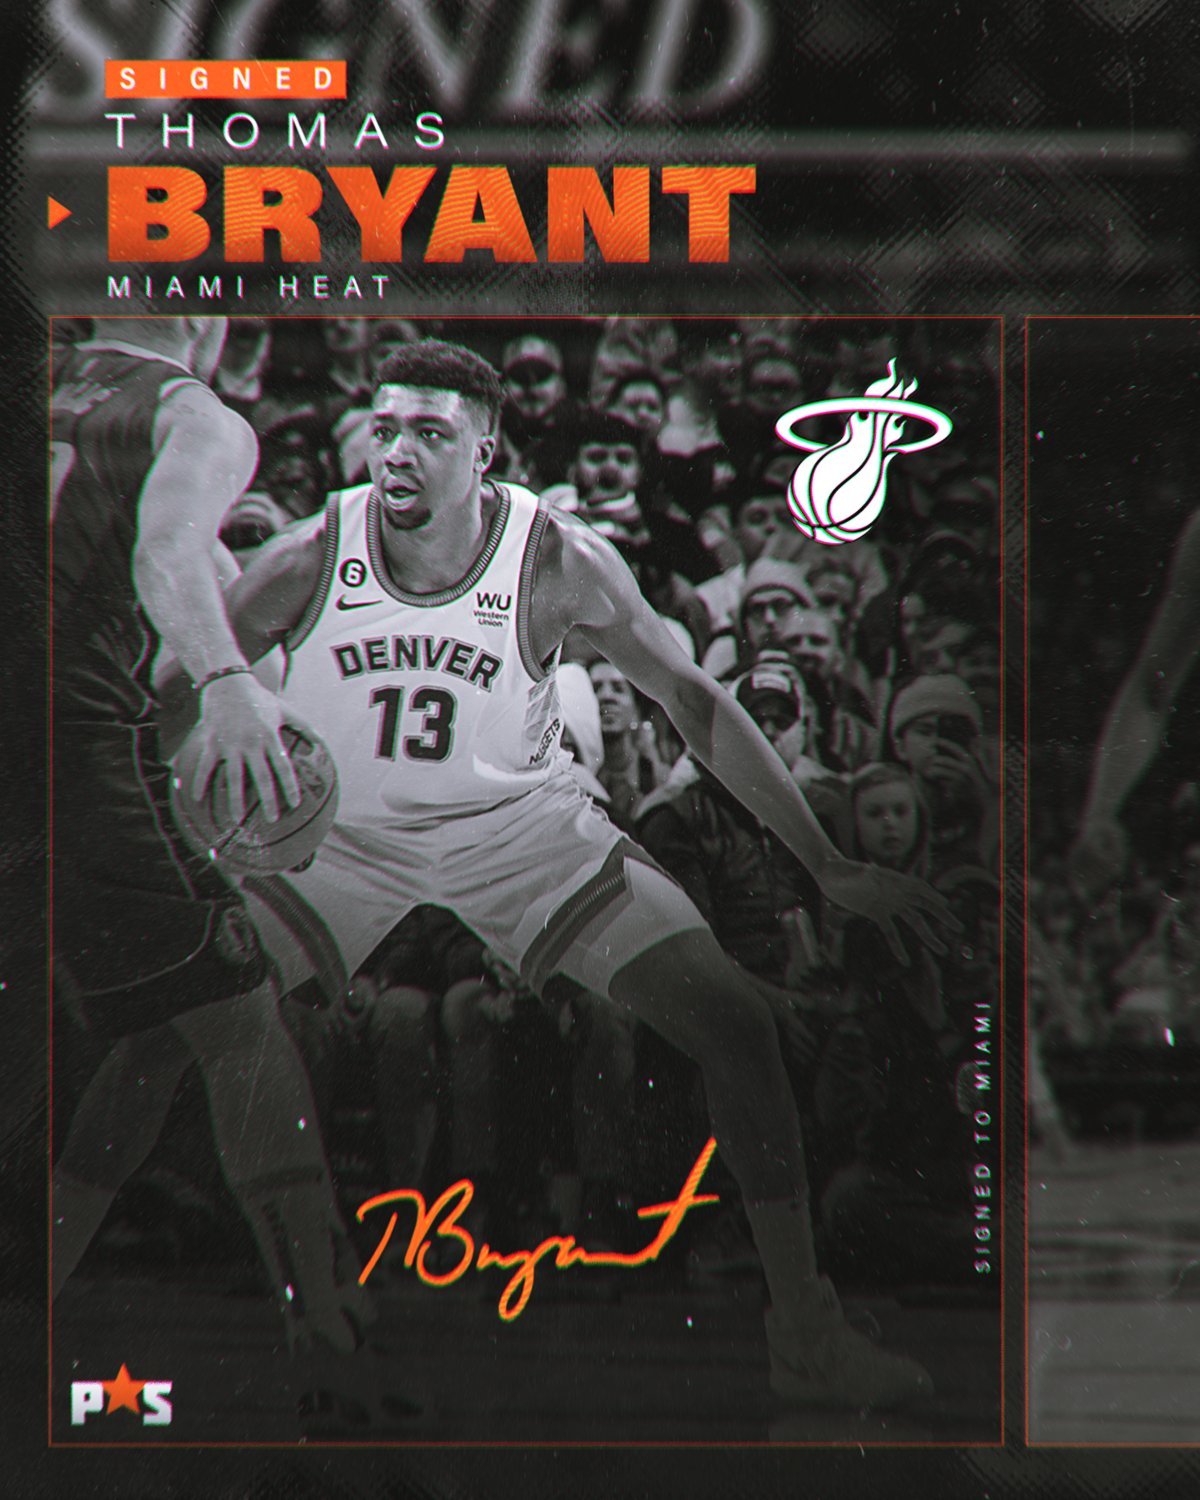 Welcome to the 3☀️5, @nolimittb! ⁣ OFFICIAL: The Miami HEAT have